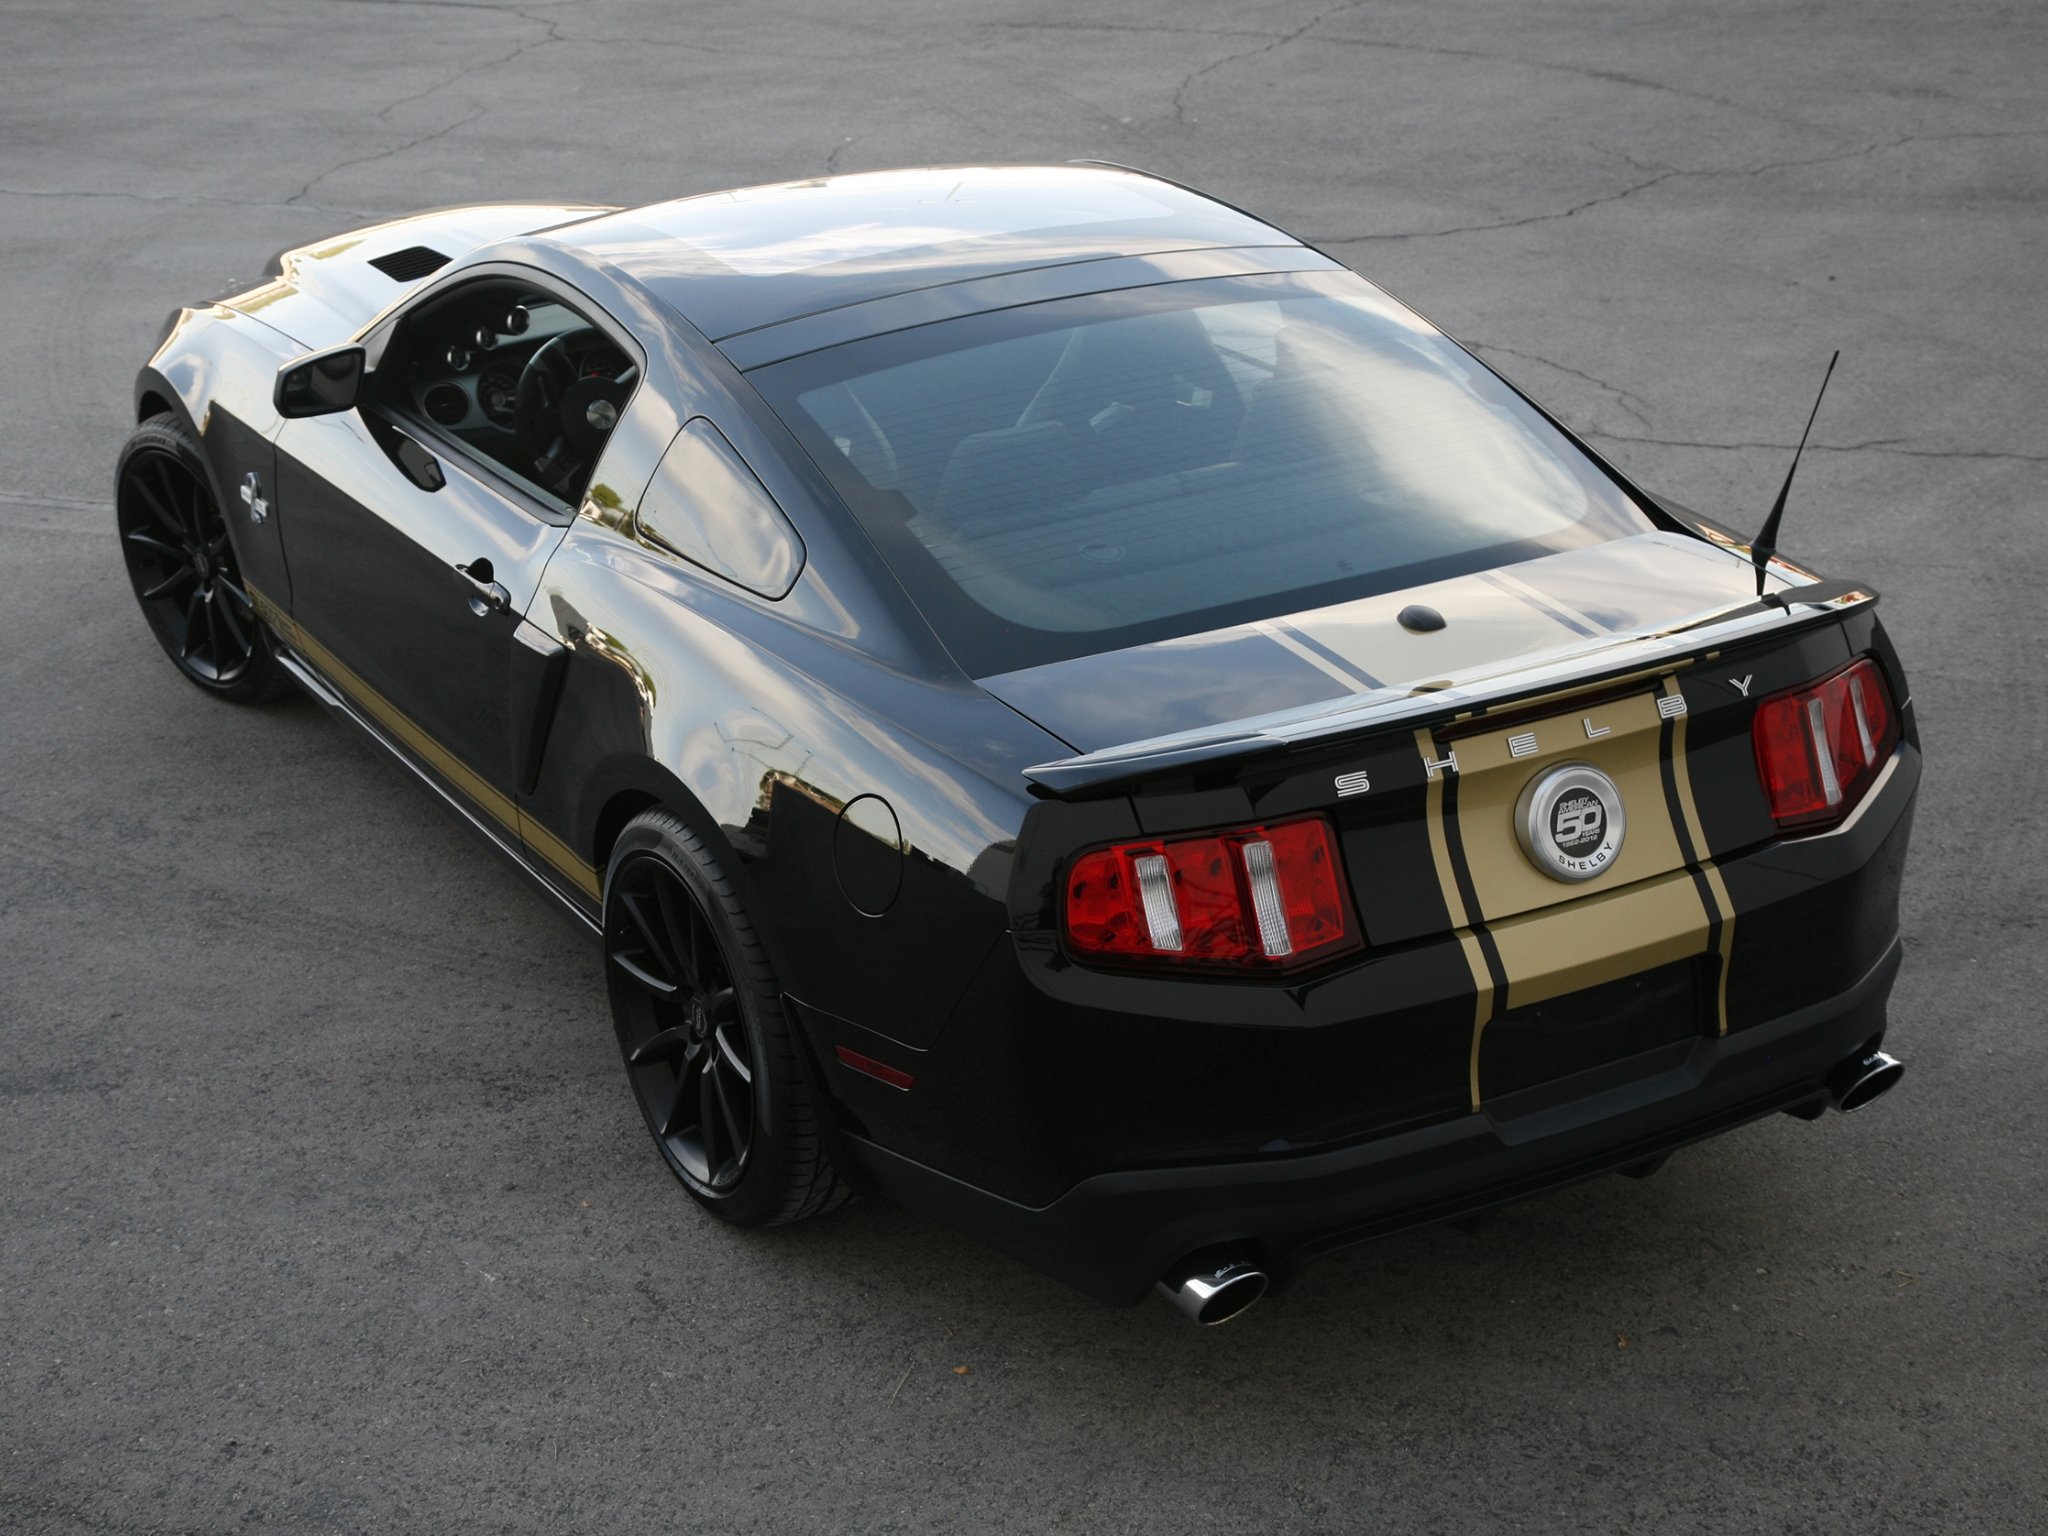 2012, Shelby, Gt500, Super, Snake, Ford, Mustang, Muscle Wallpaper